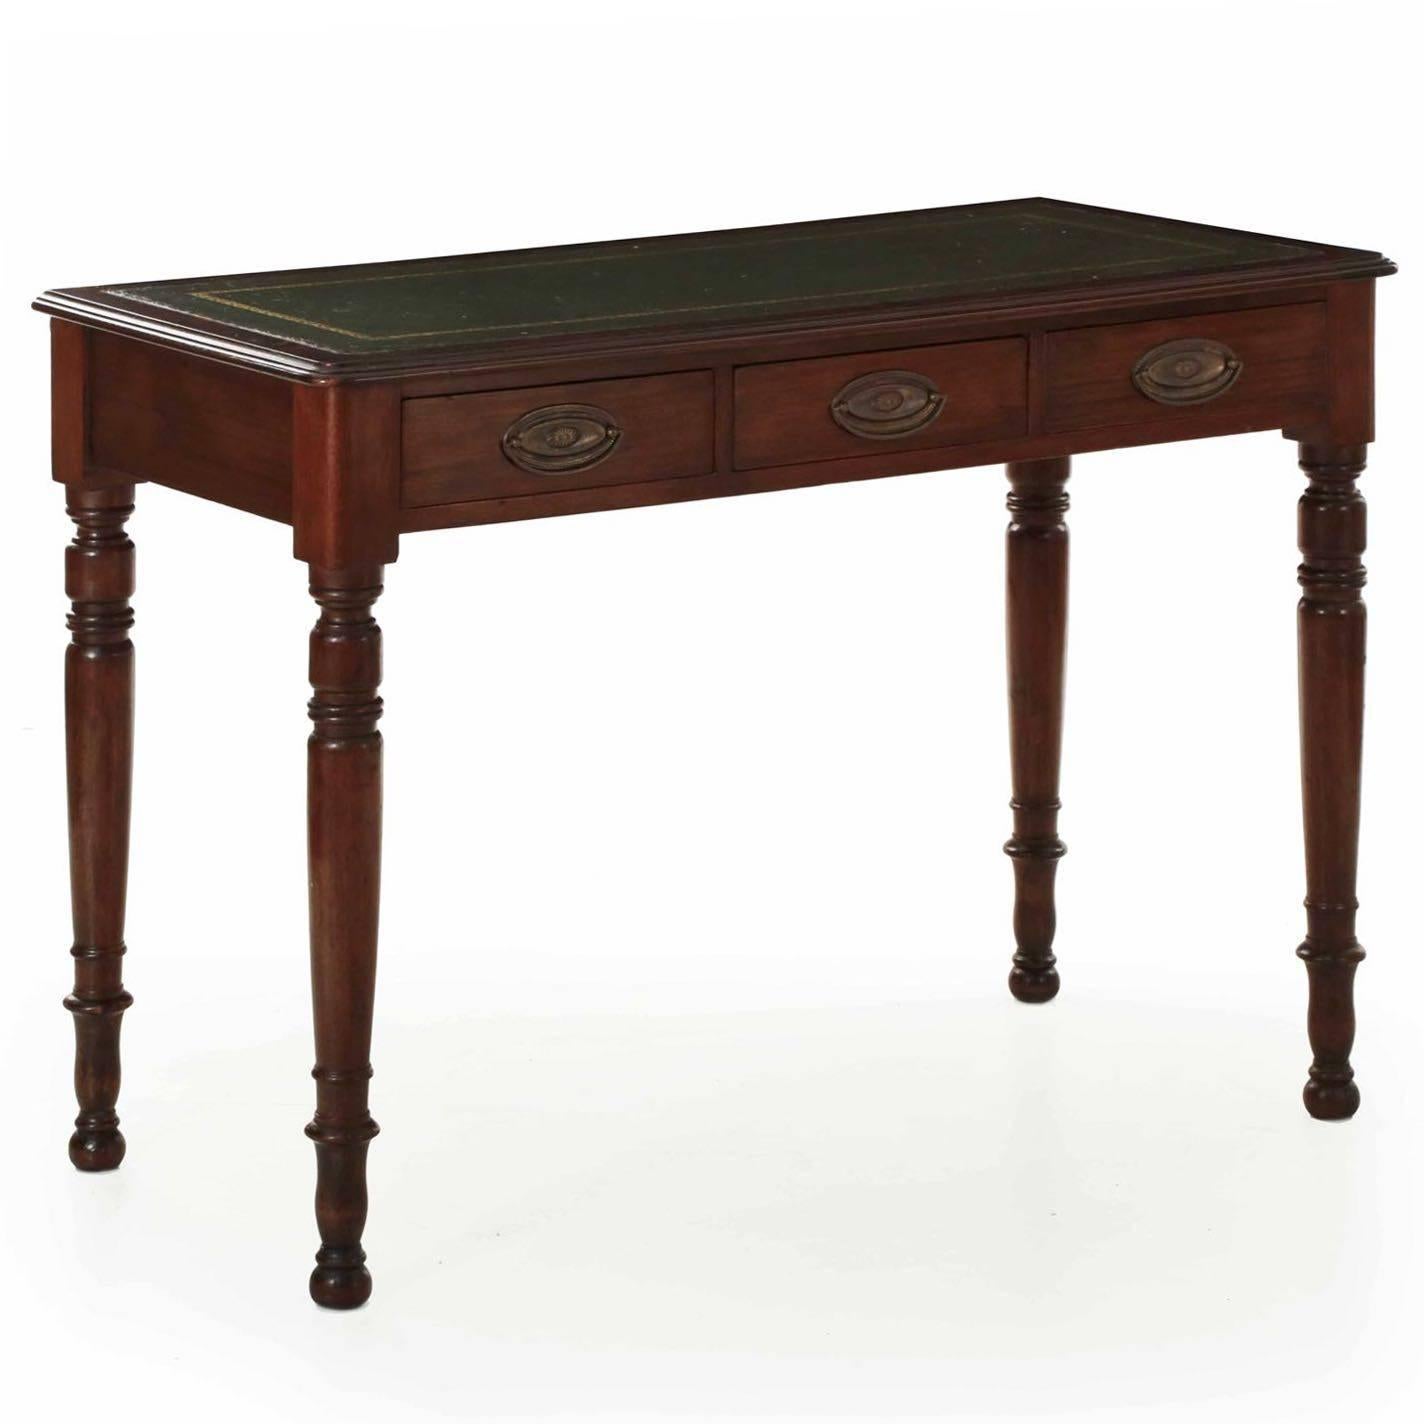 A very nice writing table in the Regency style from the last quarter of the 19th century, this orderly little piece is quite tasteful in it’s dimensions and most attractive in surface patina. The old aged mahogany has beautifully worn and burnished